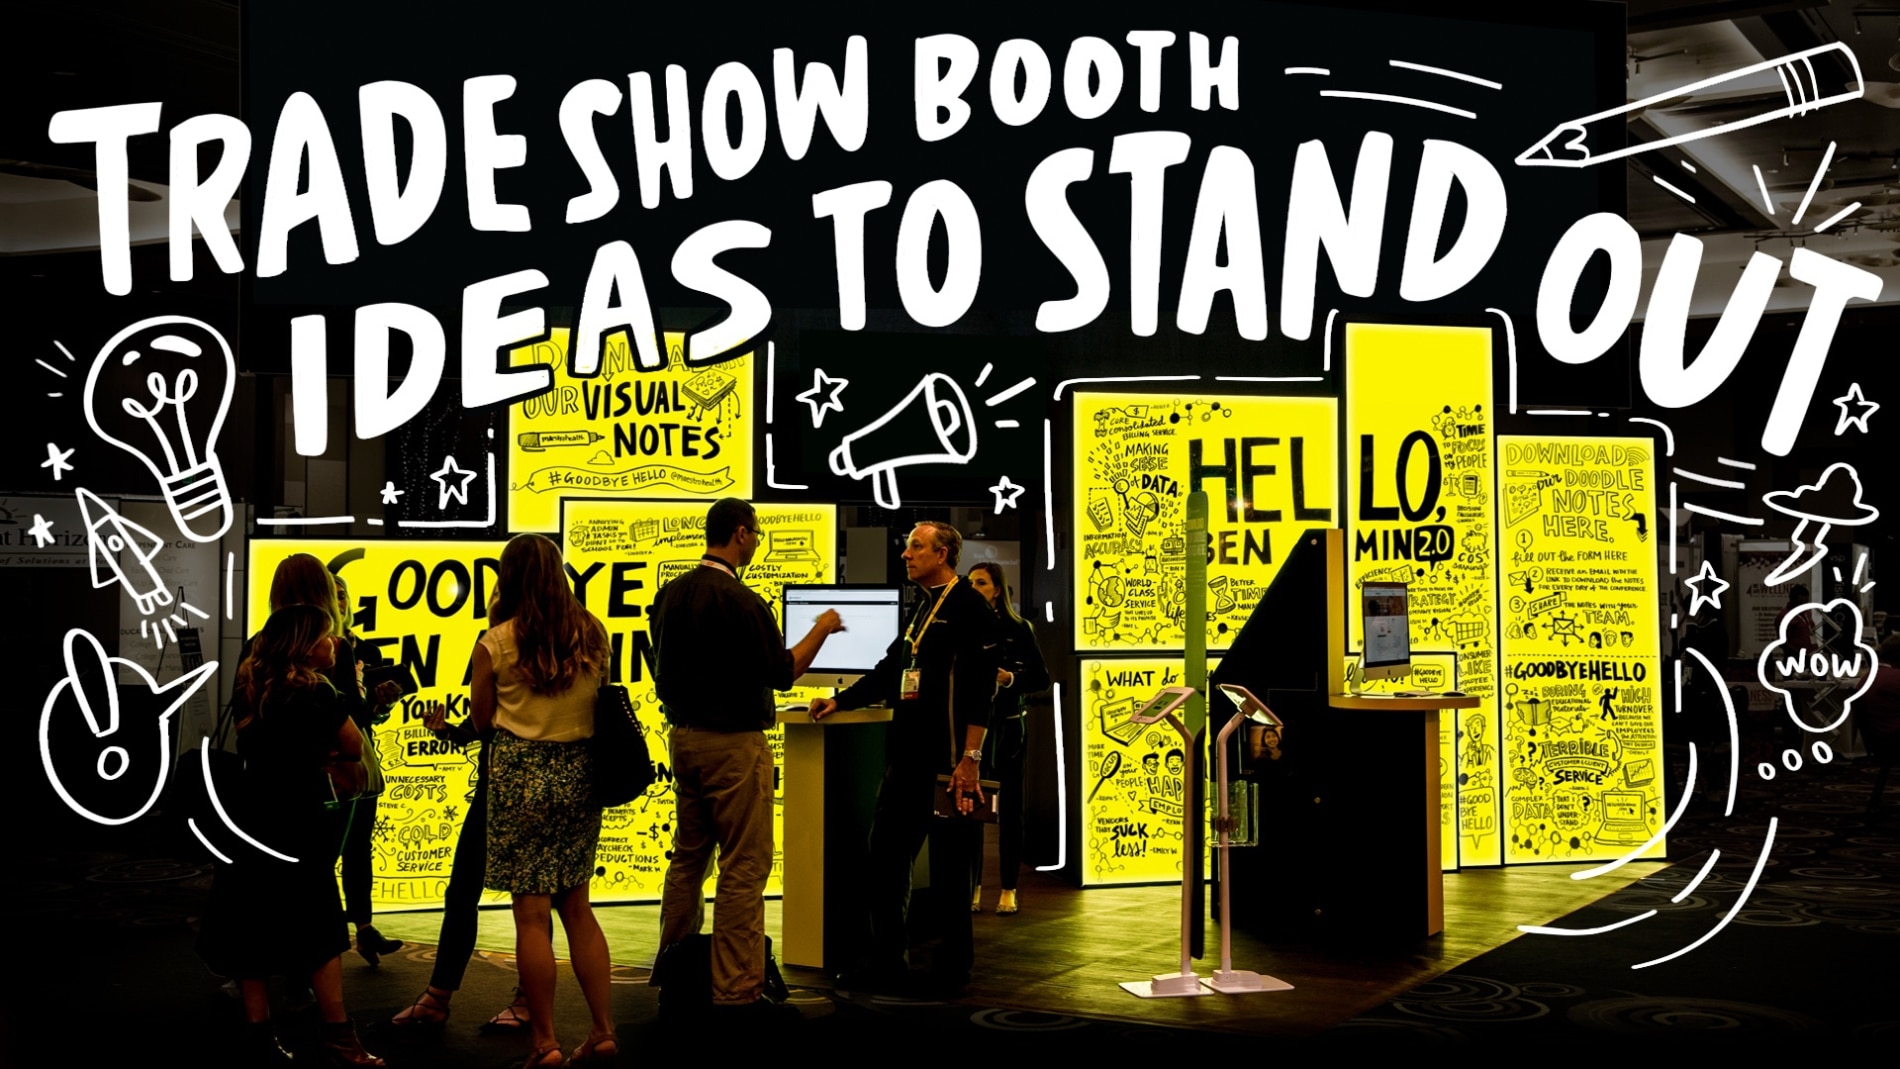 Three Trade Show Booth Design Ideas Guaranteed to Stand Out